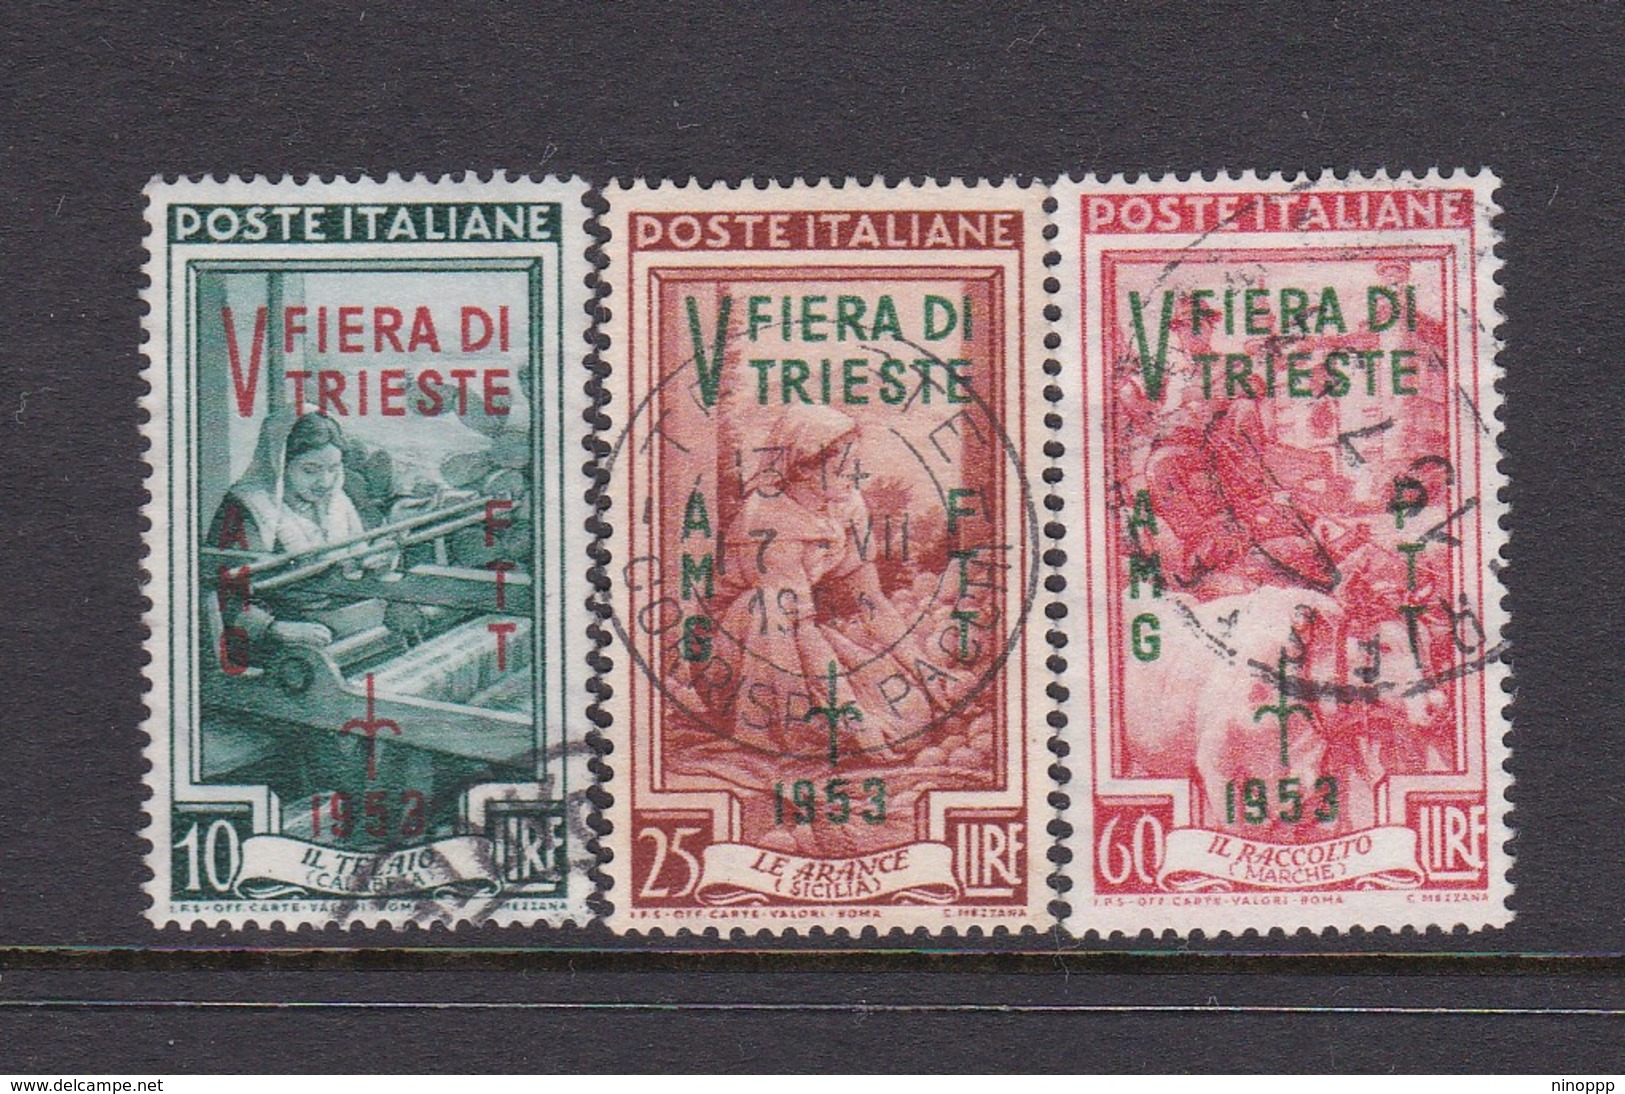 Trieste Allied Military Government S 178-180 1953 5th Trieste Fair Used - Used